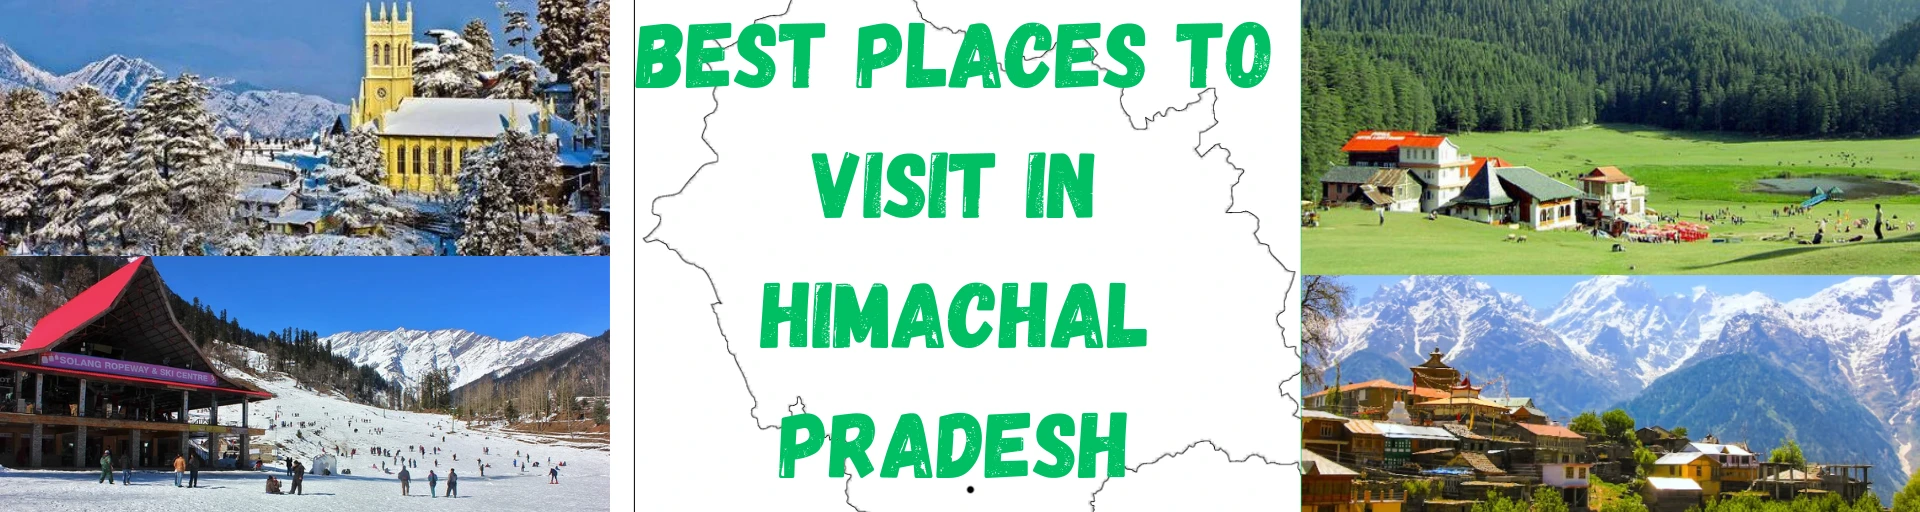 Best places to visit in Himachal